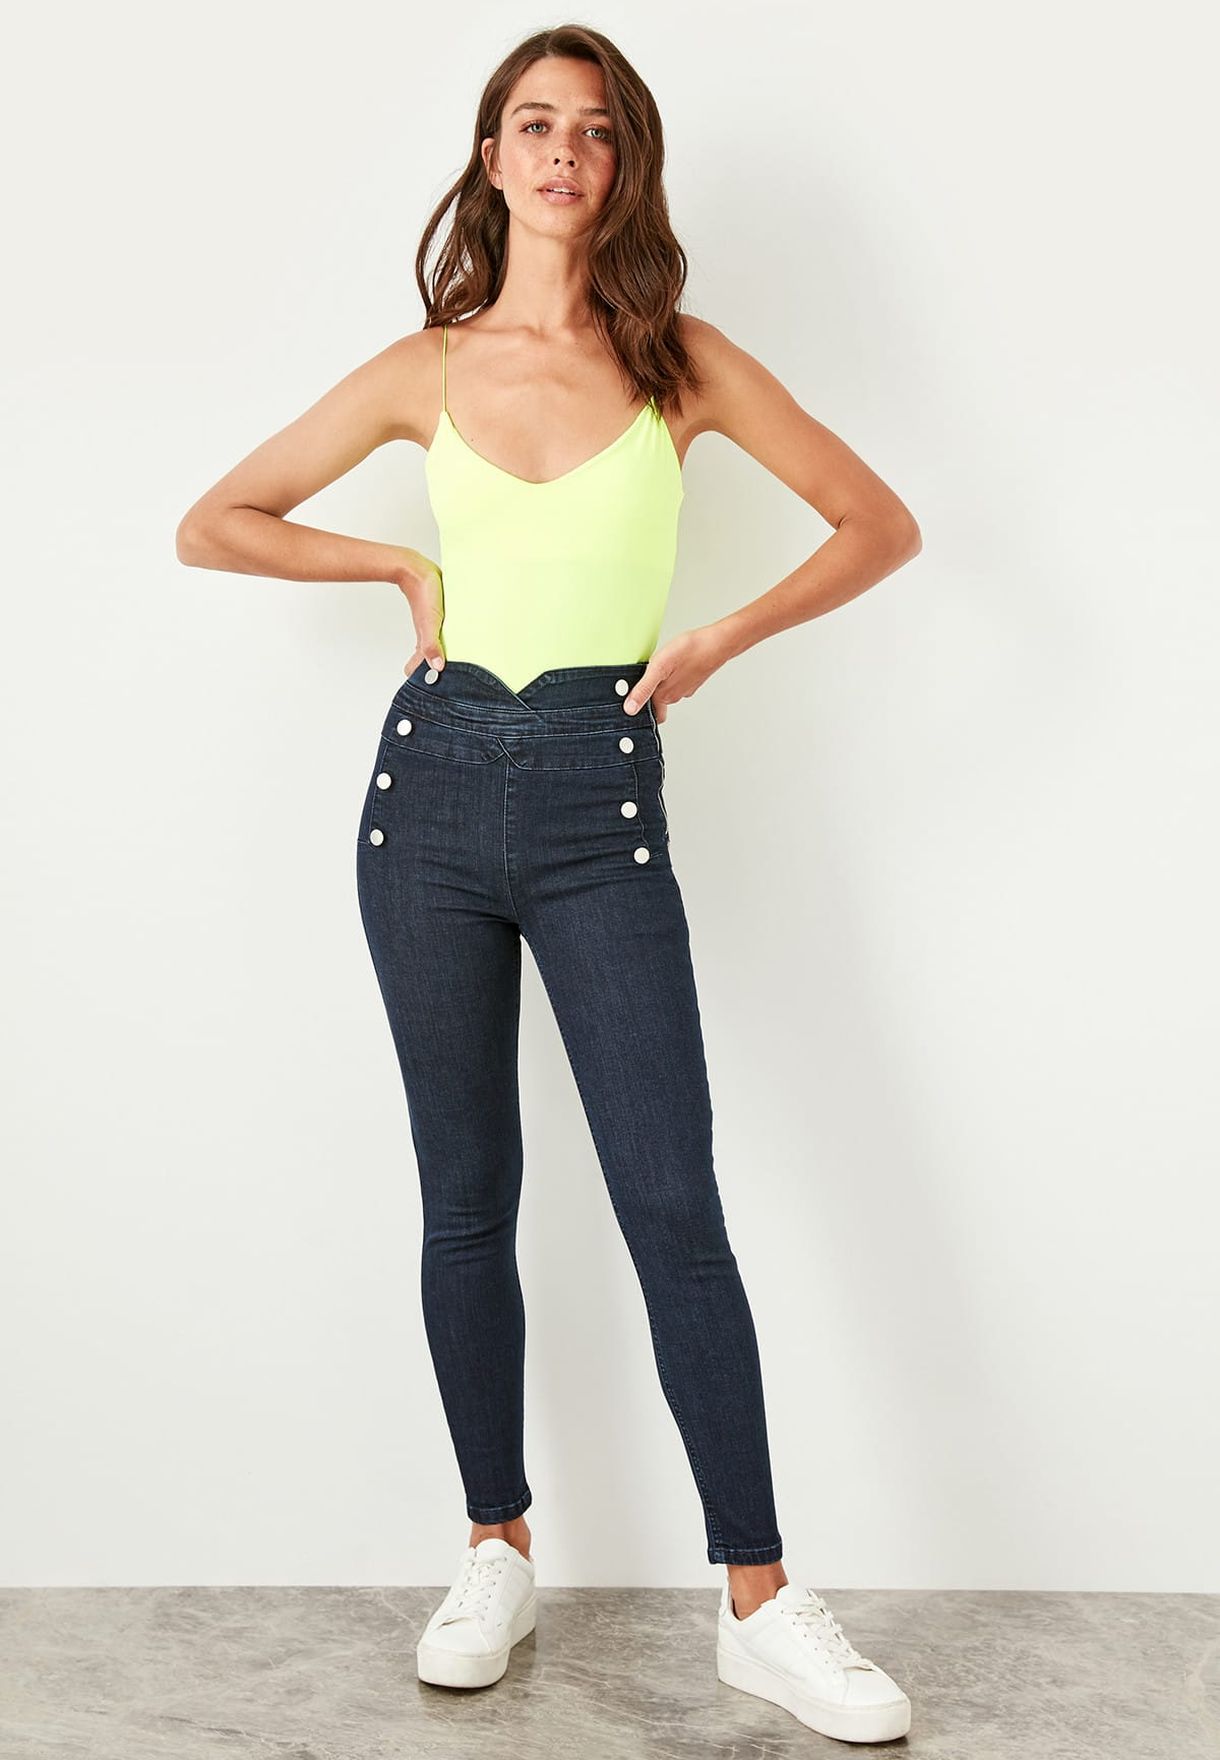 button skinny jeans